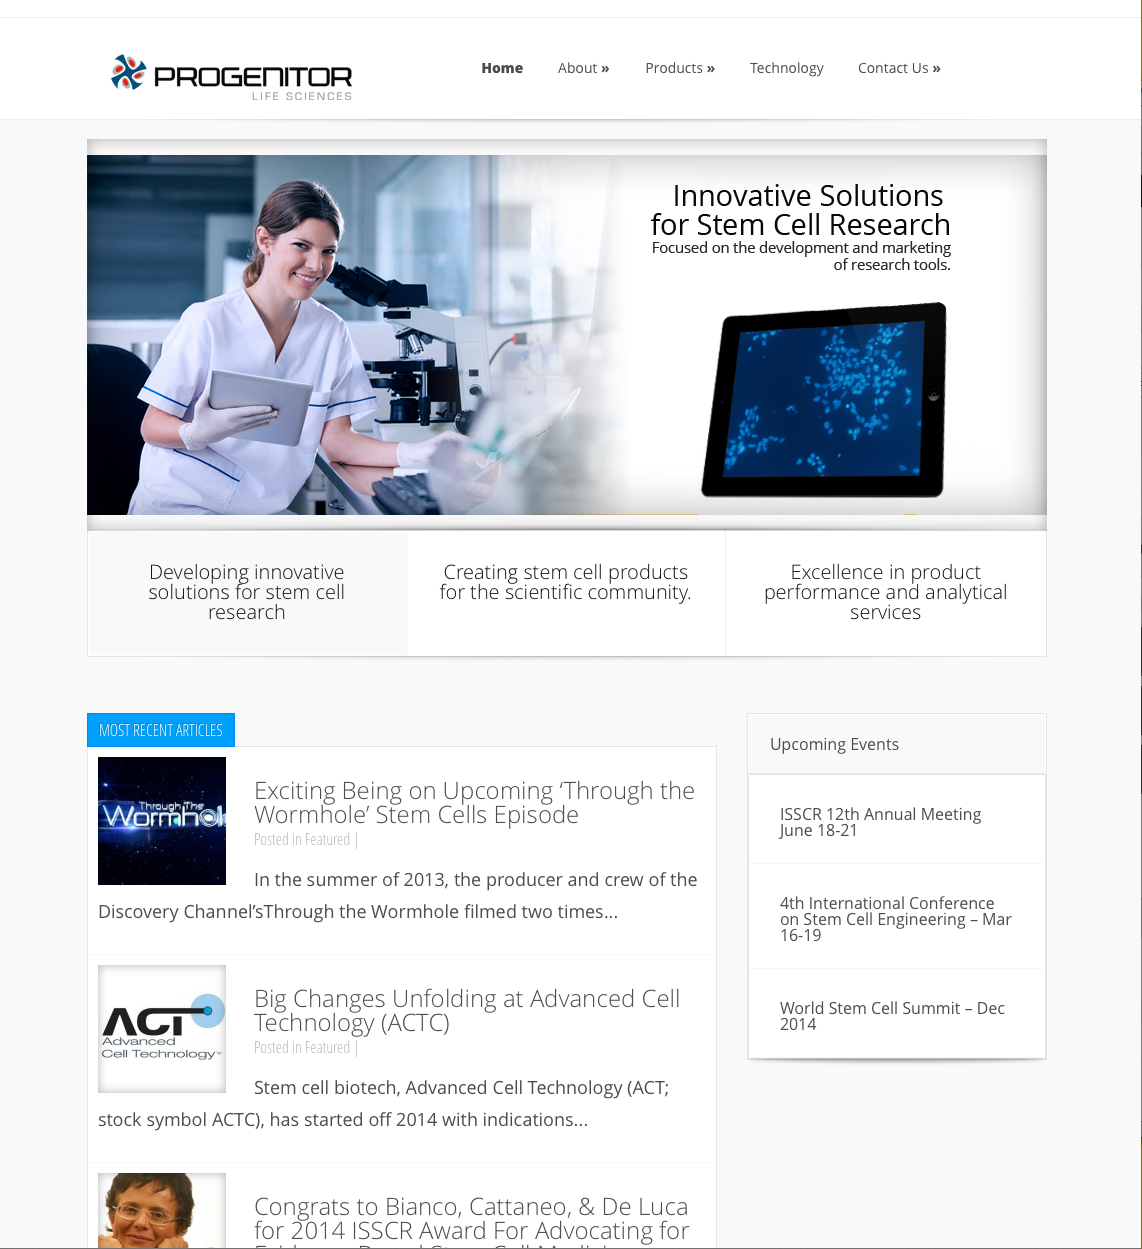 progenitor life sciences HOME PAGE